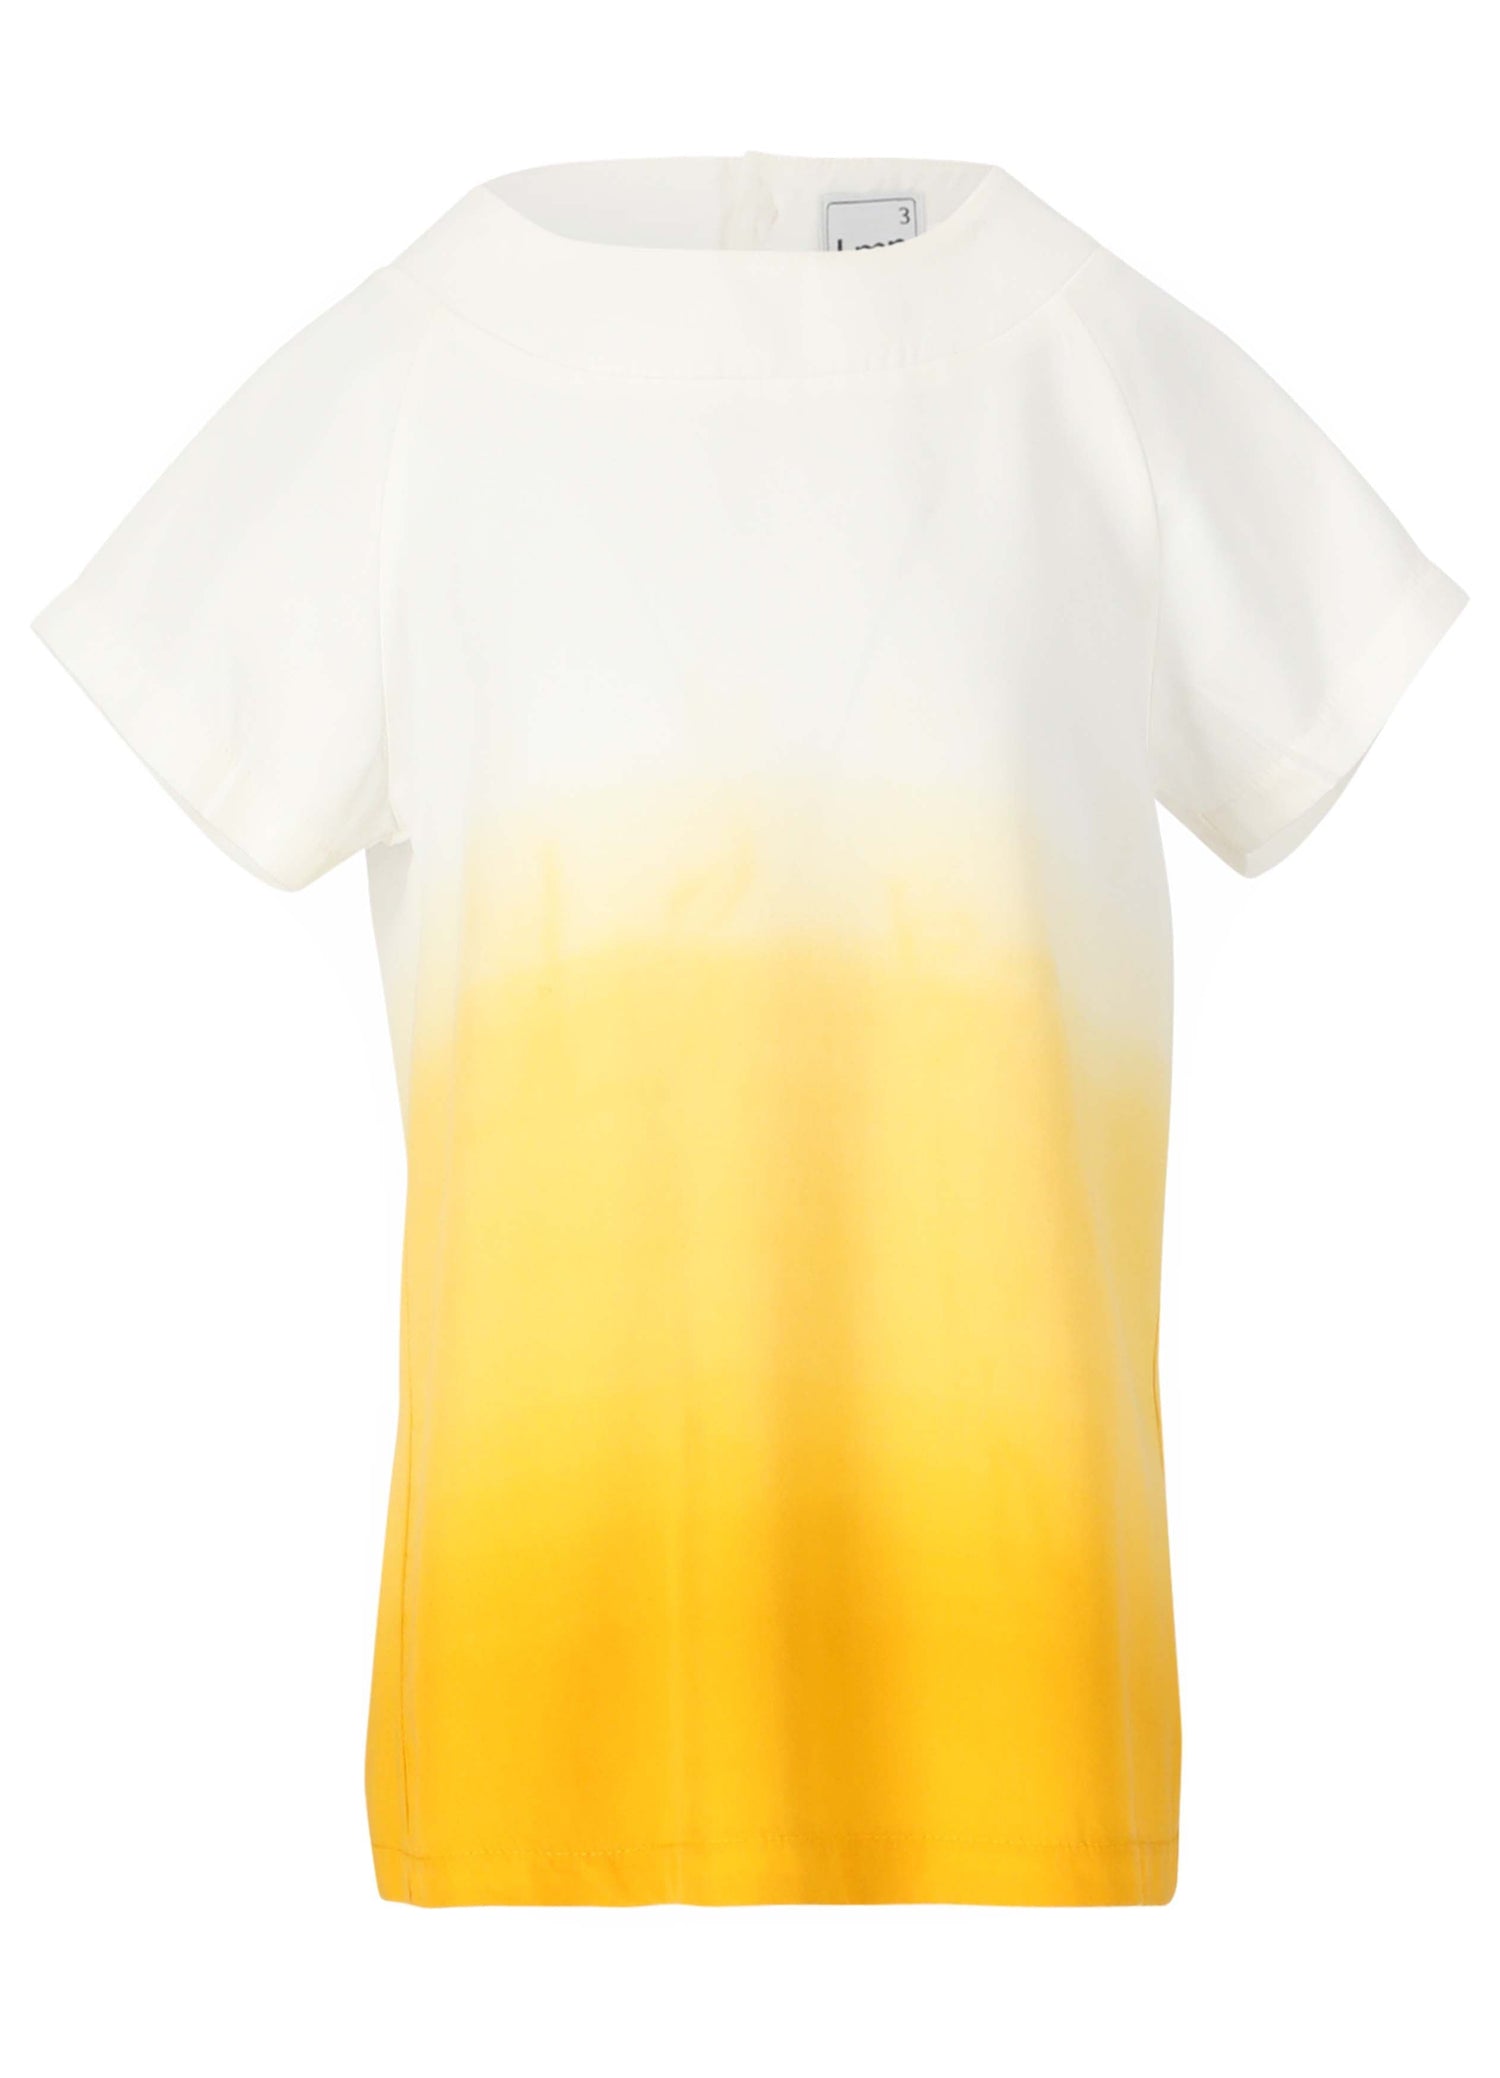 Top No. 18 - Mineral Yellow Tops LMN3 